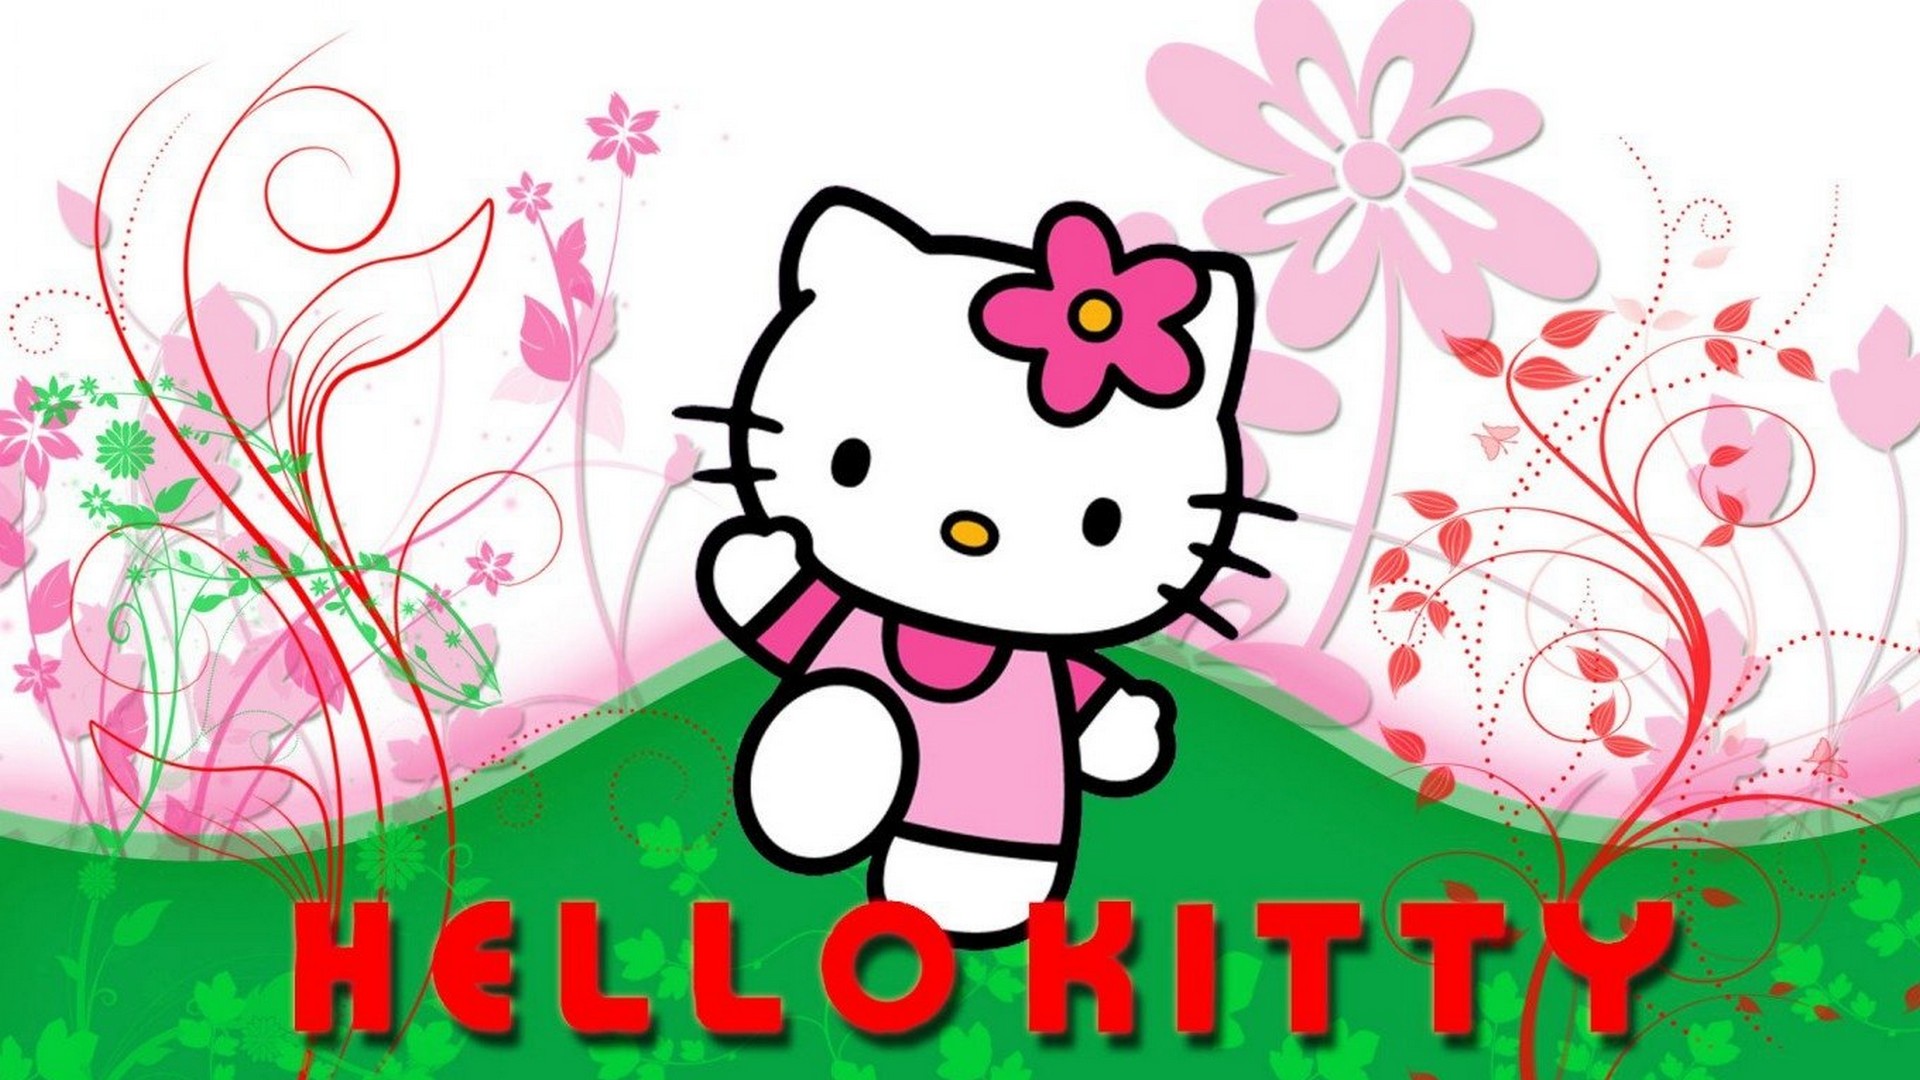 Wallpaper Hello Kitty Images with image resolution 1920x1080 pixel. You can use this wallpaper as background for your desktop Computer Screensavers, Android or iPhone smartphones